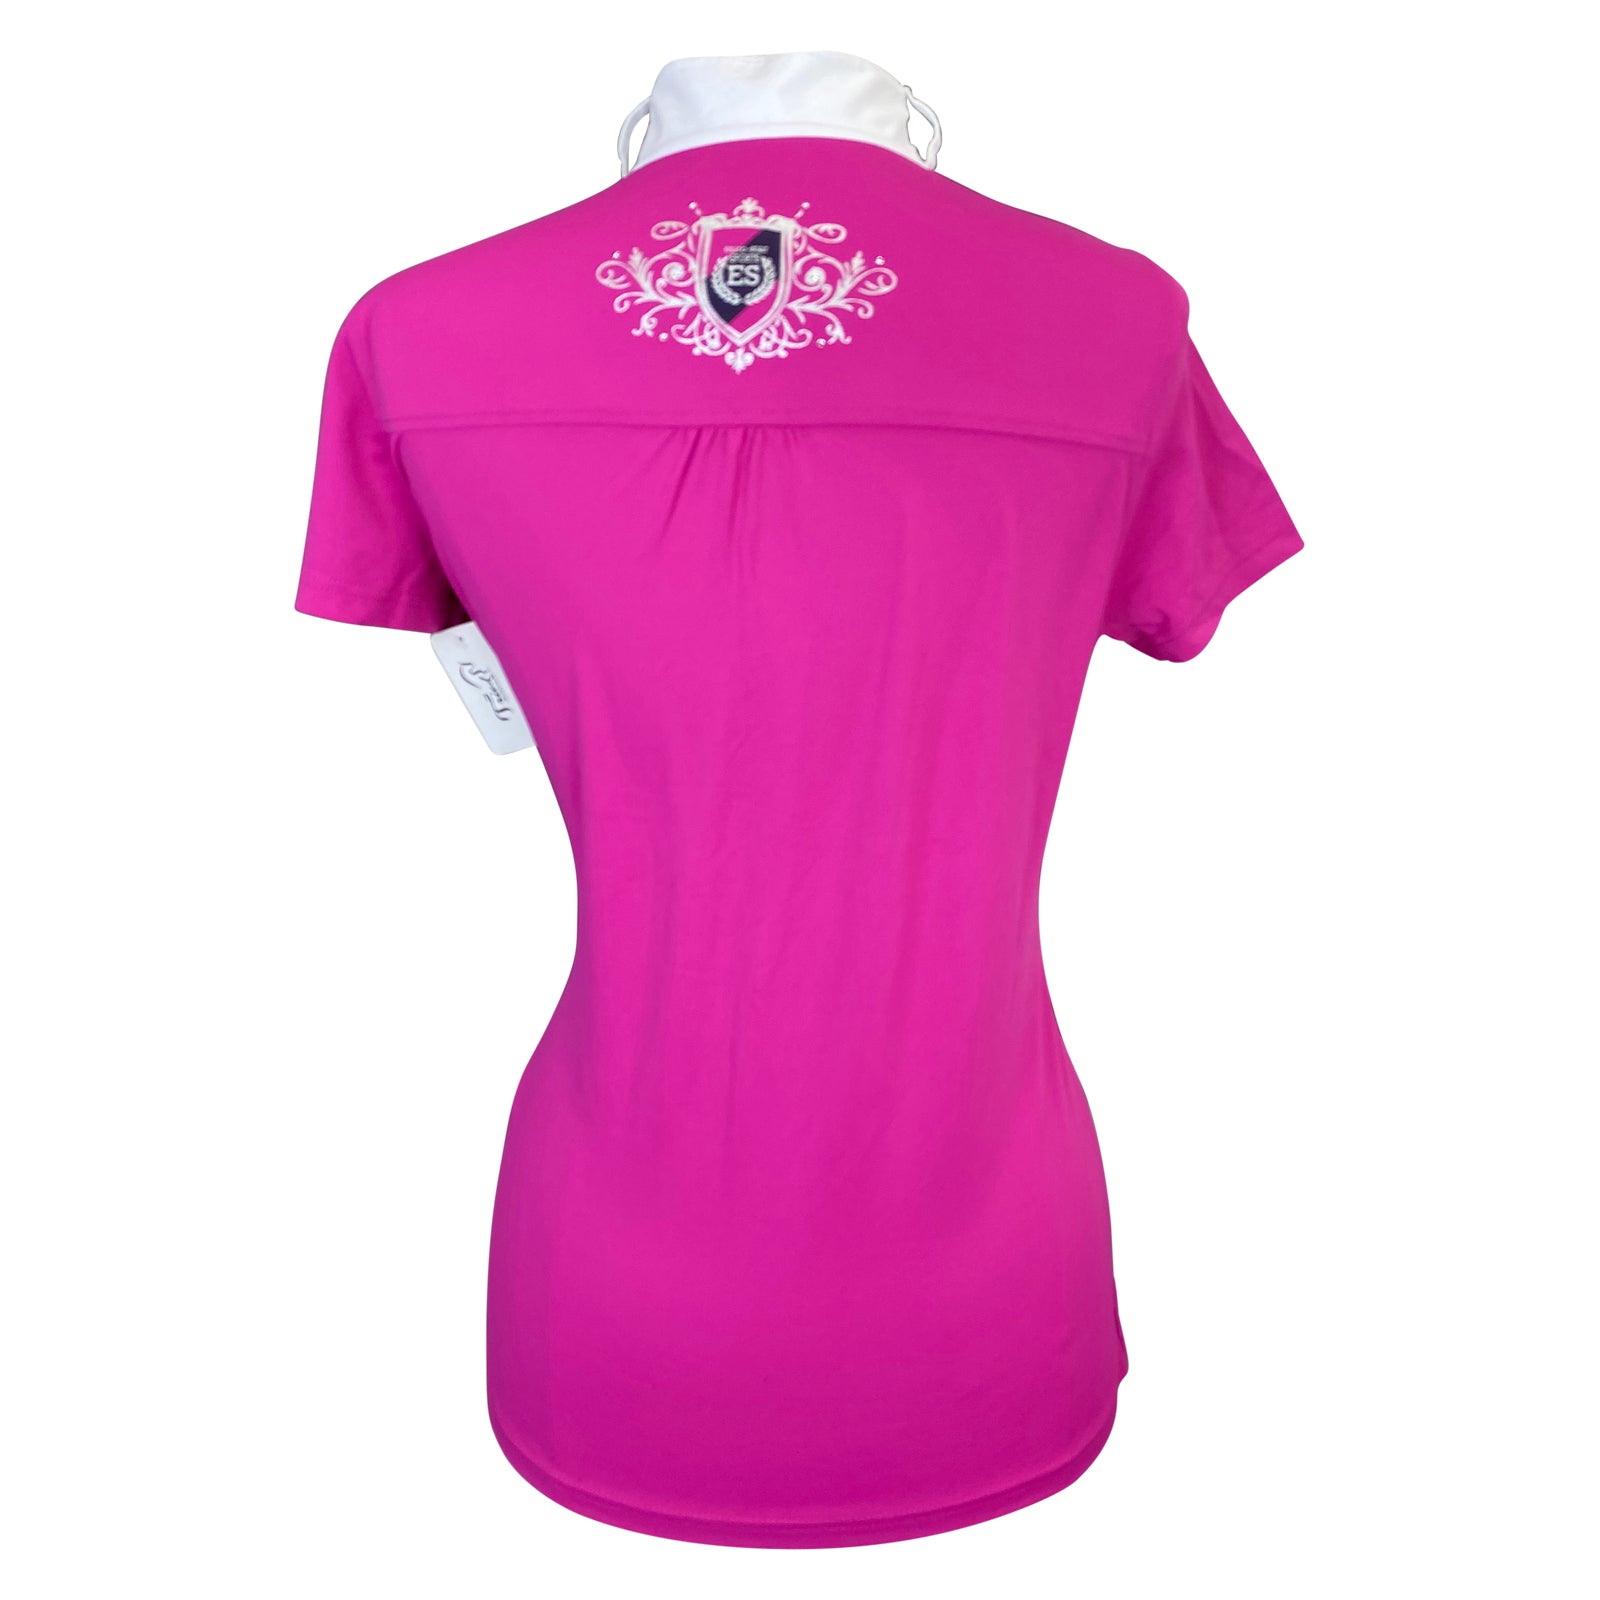 Back of Euro Star 'Hannah' Competition Shirt in Hot Pink